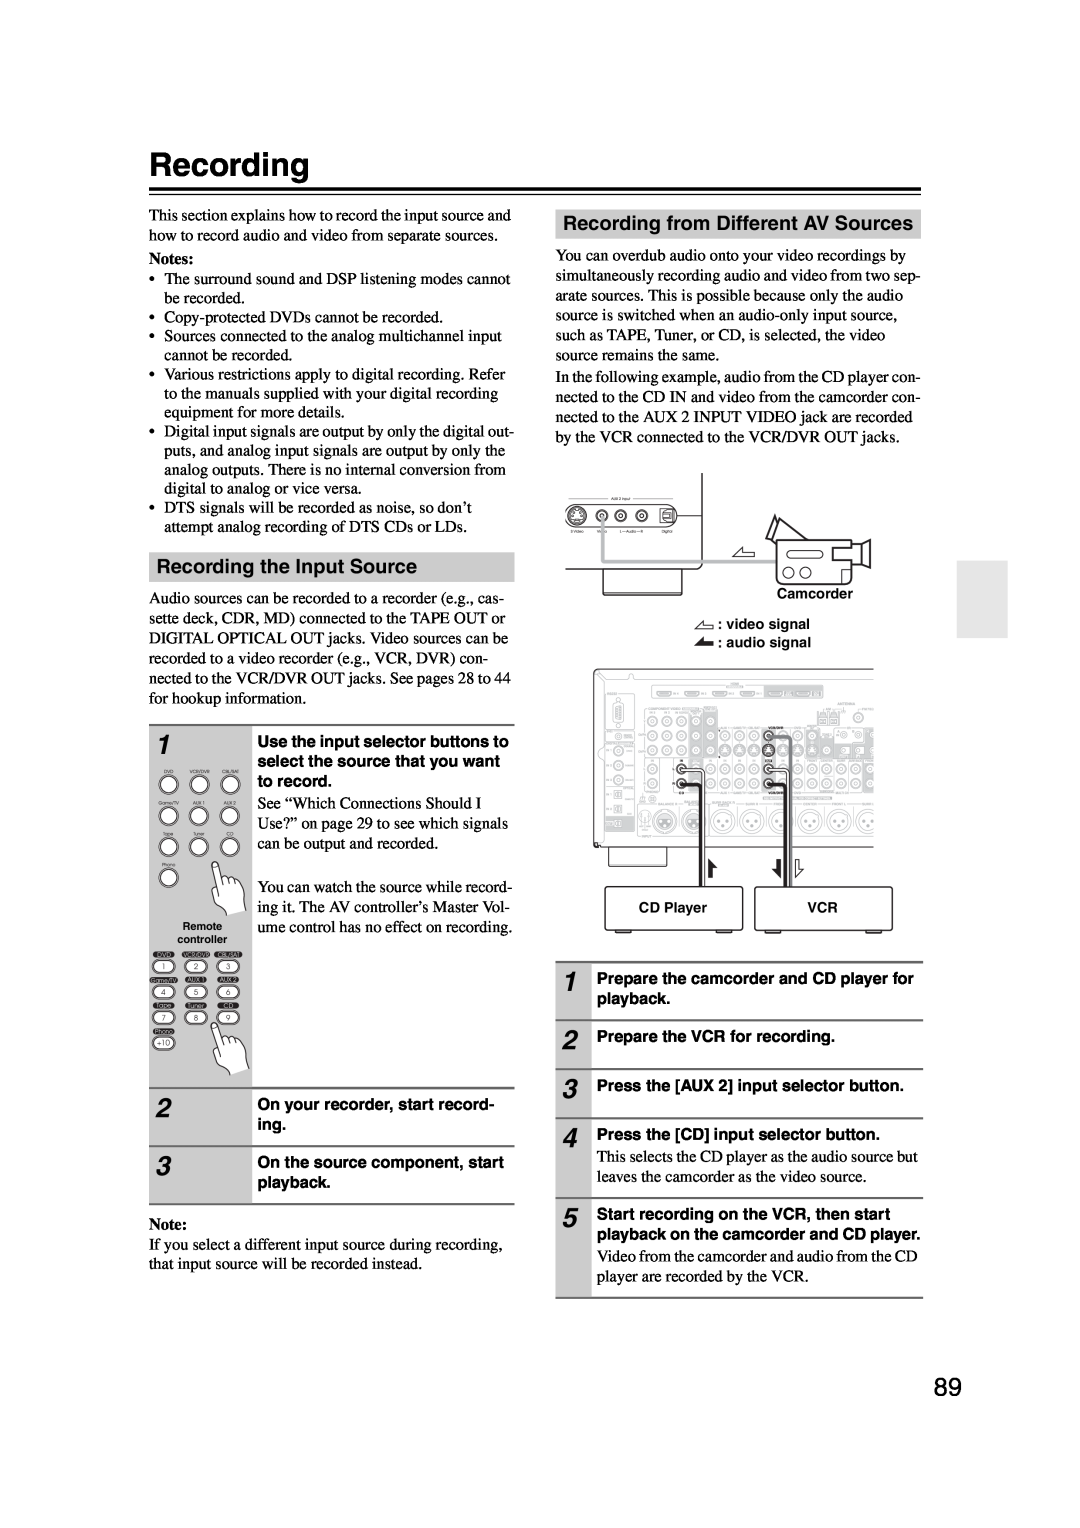 Integra DHC-9.9 instruction manual Recording the Input Source, Recording from Different AV Sources, Notes 